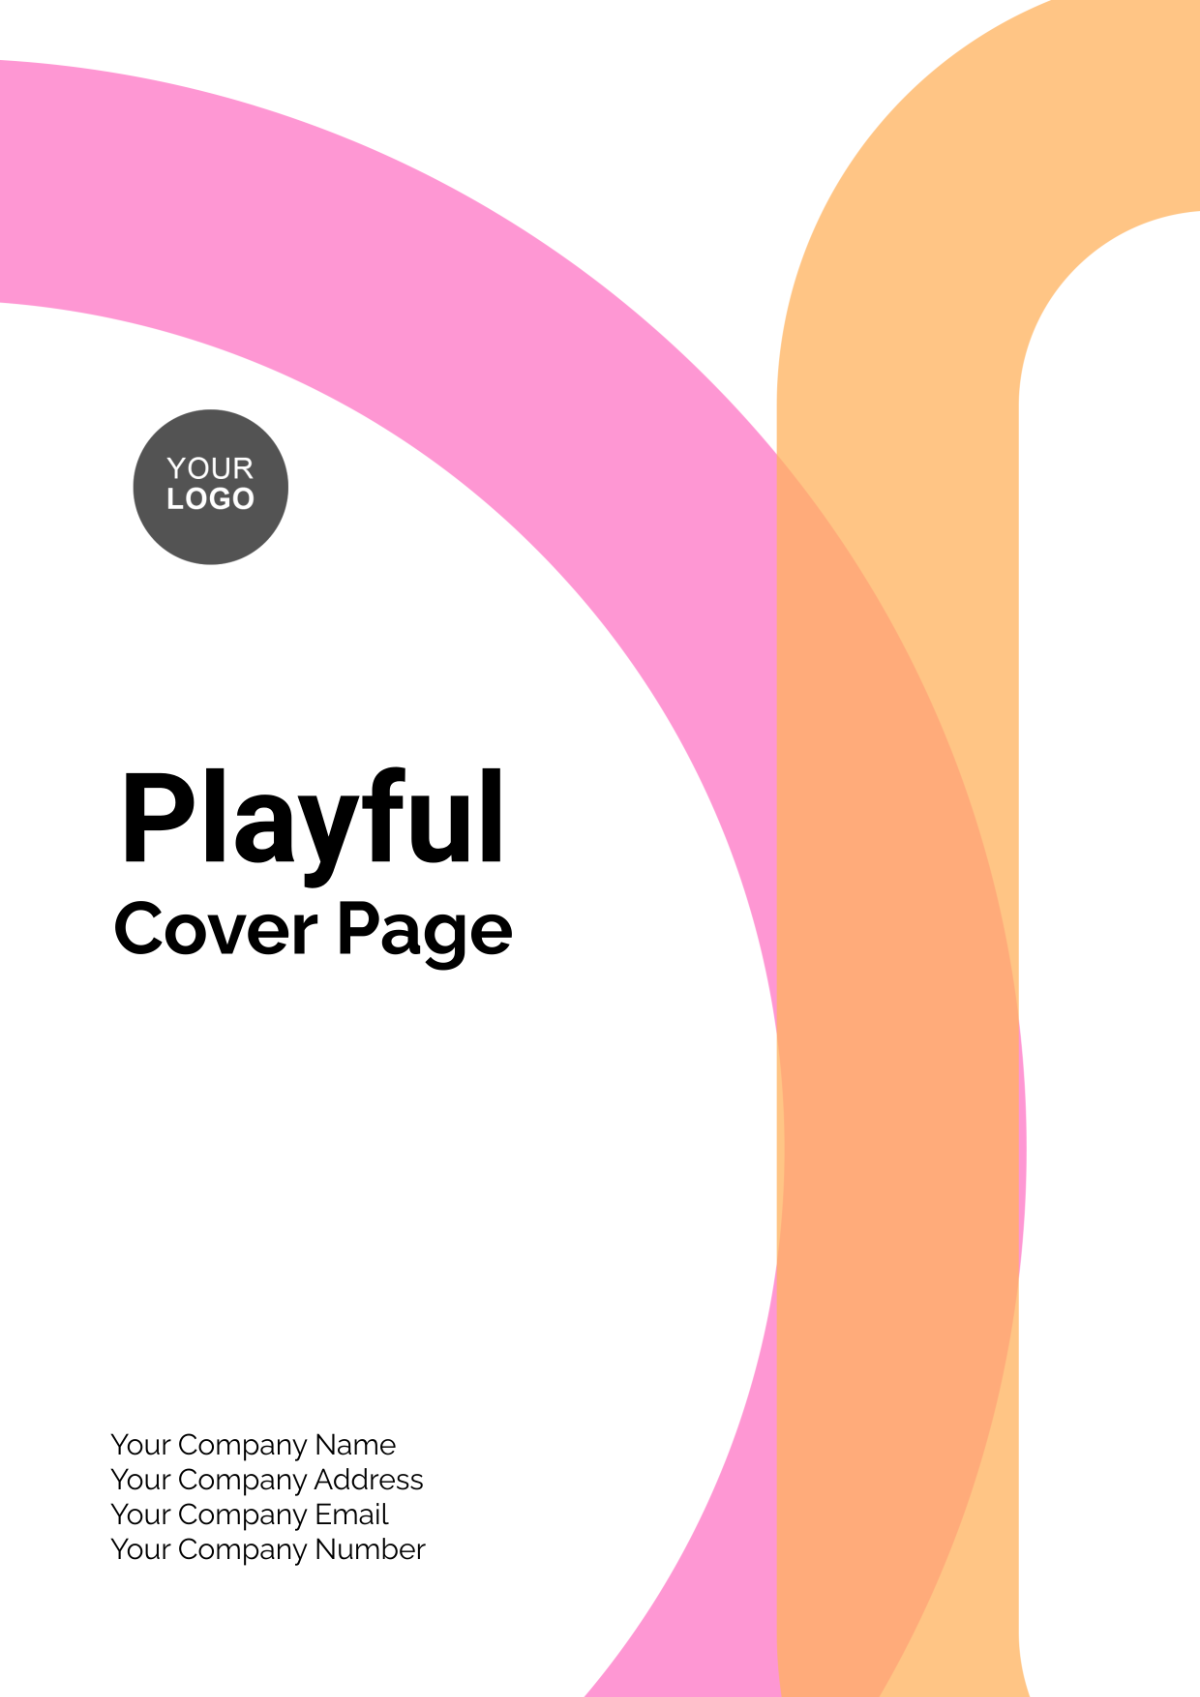 Playful Cover Page Design